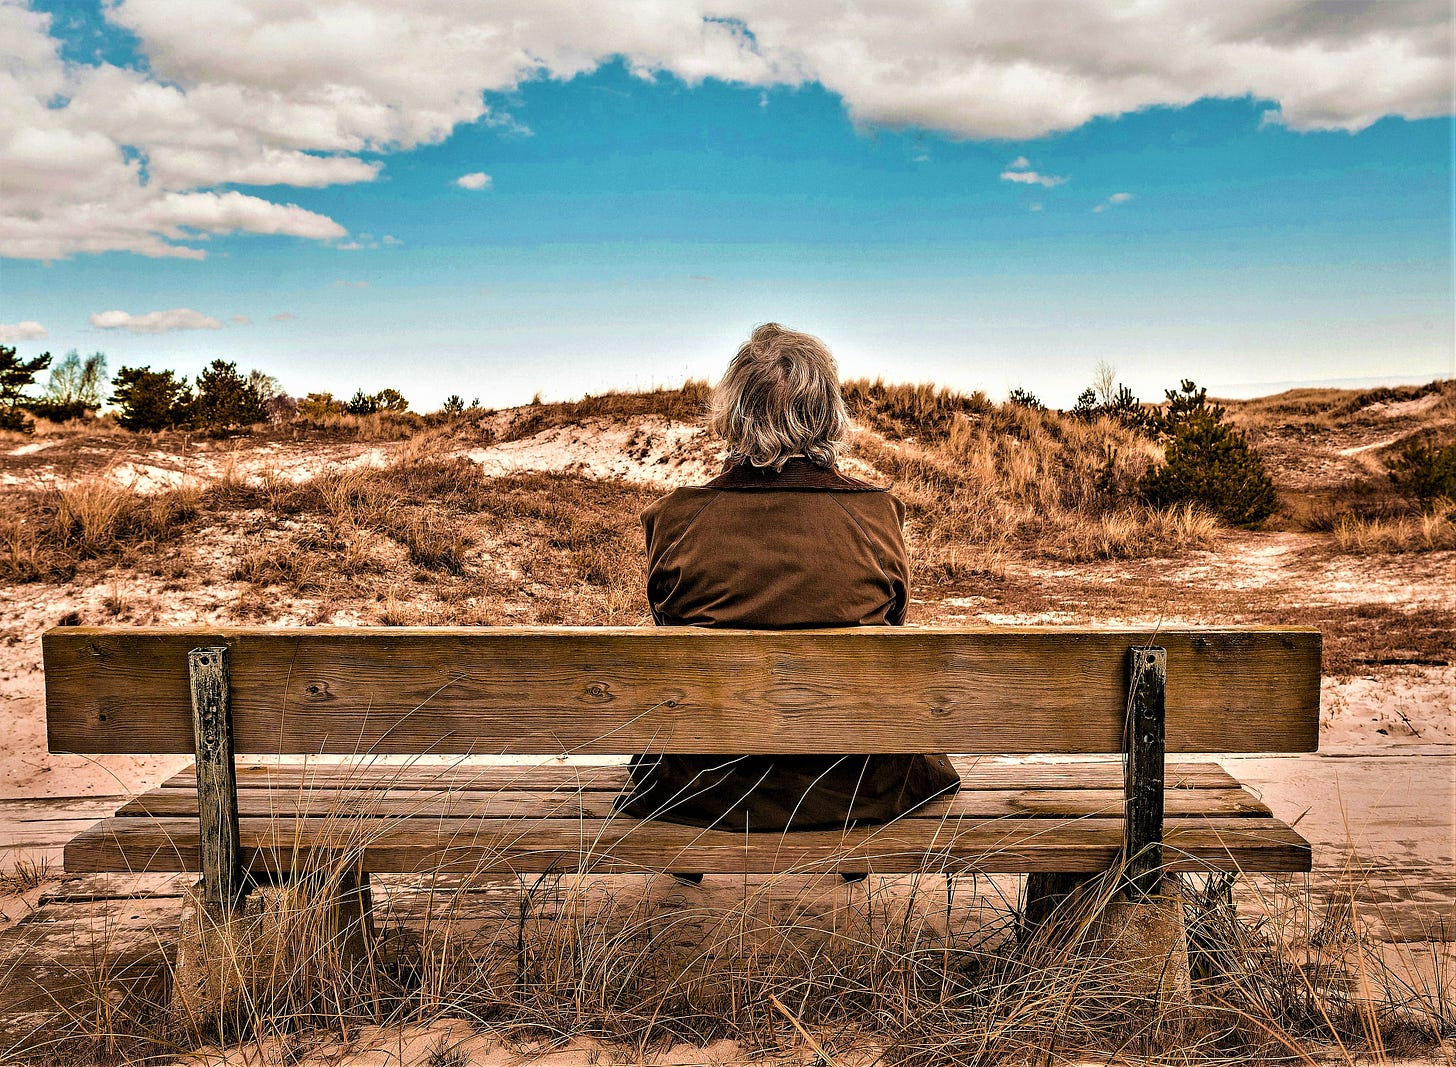 rear view of person sitting on wooden bench looking out over desert landscape and cloudy sky